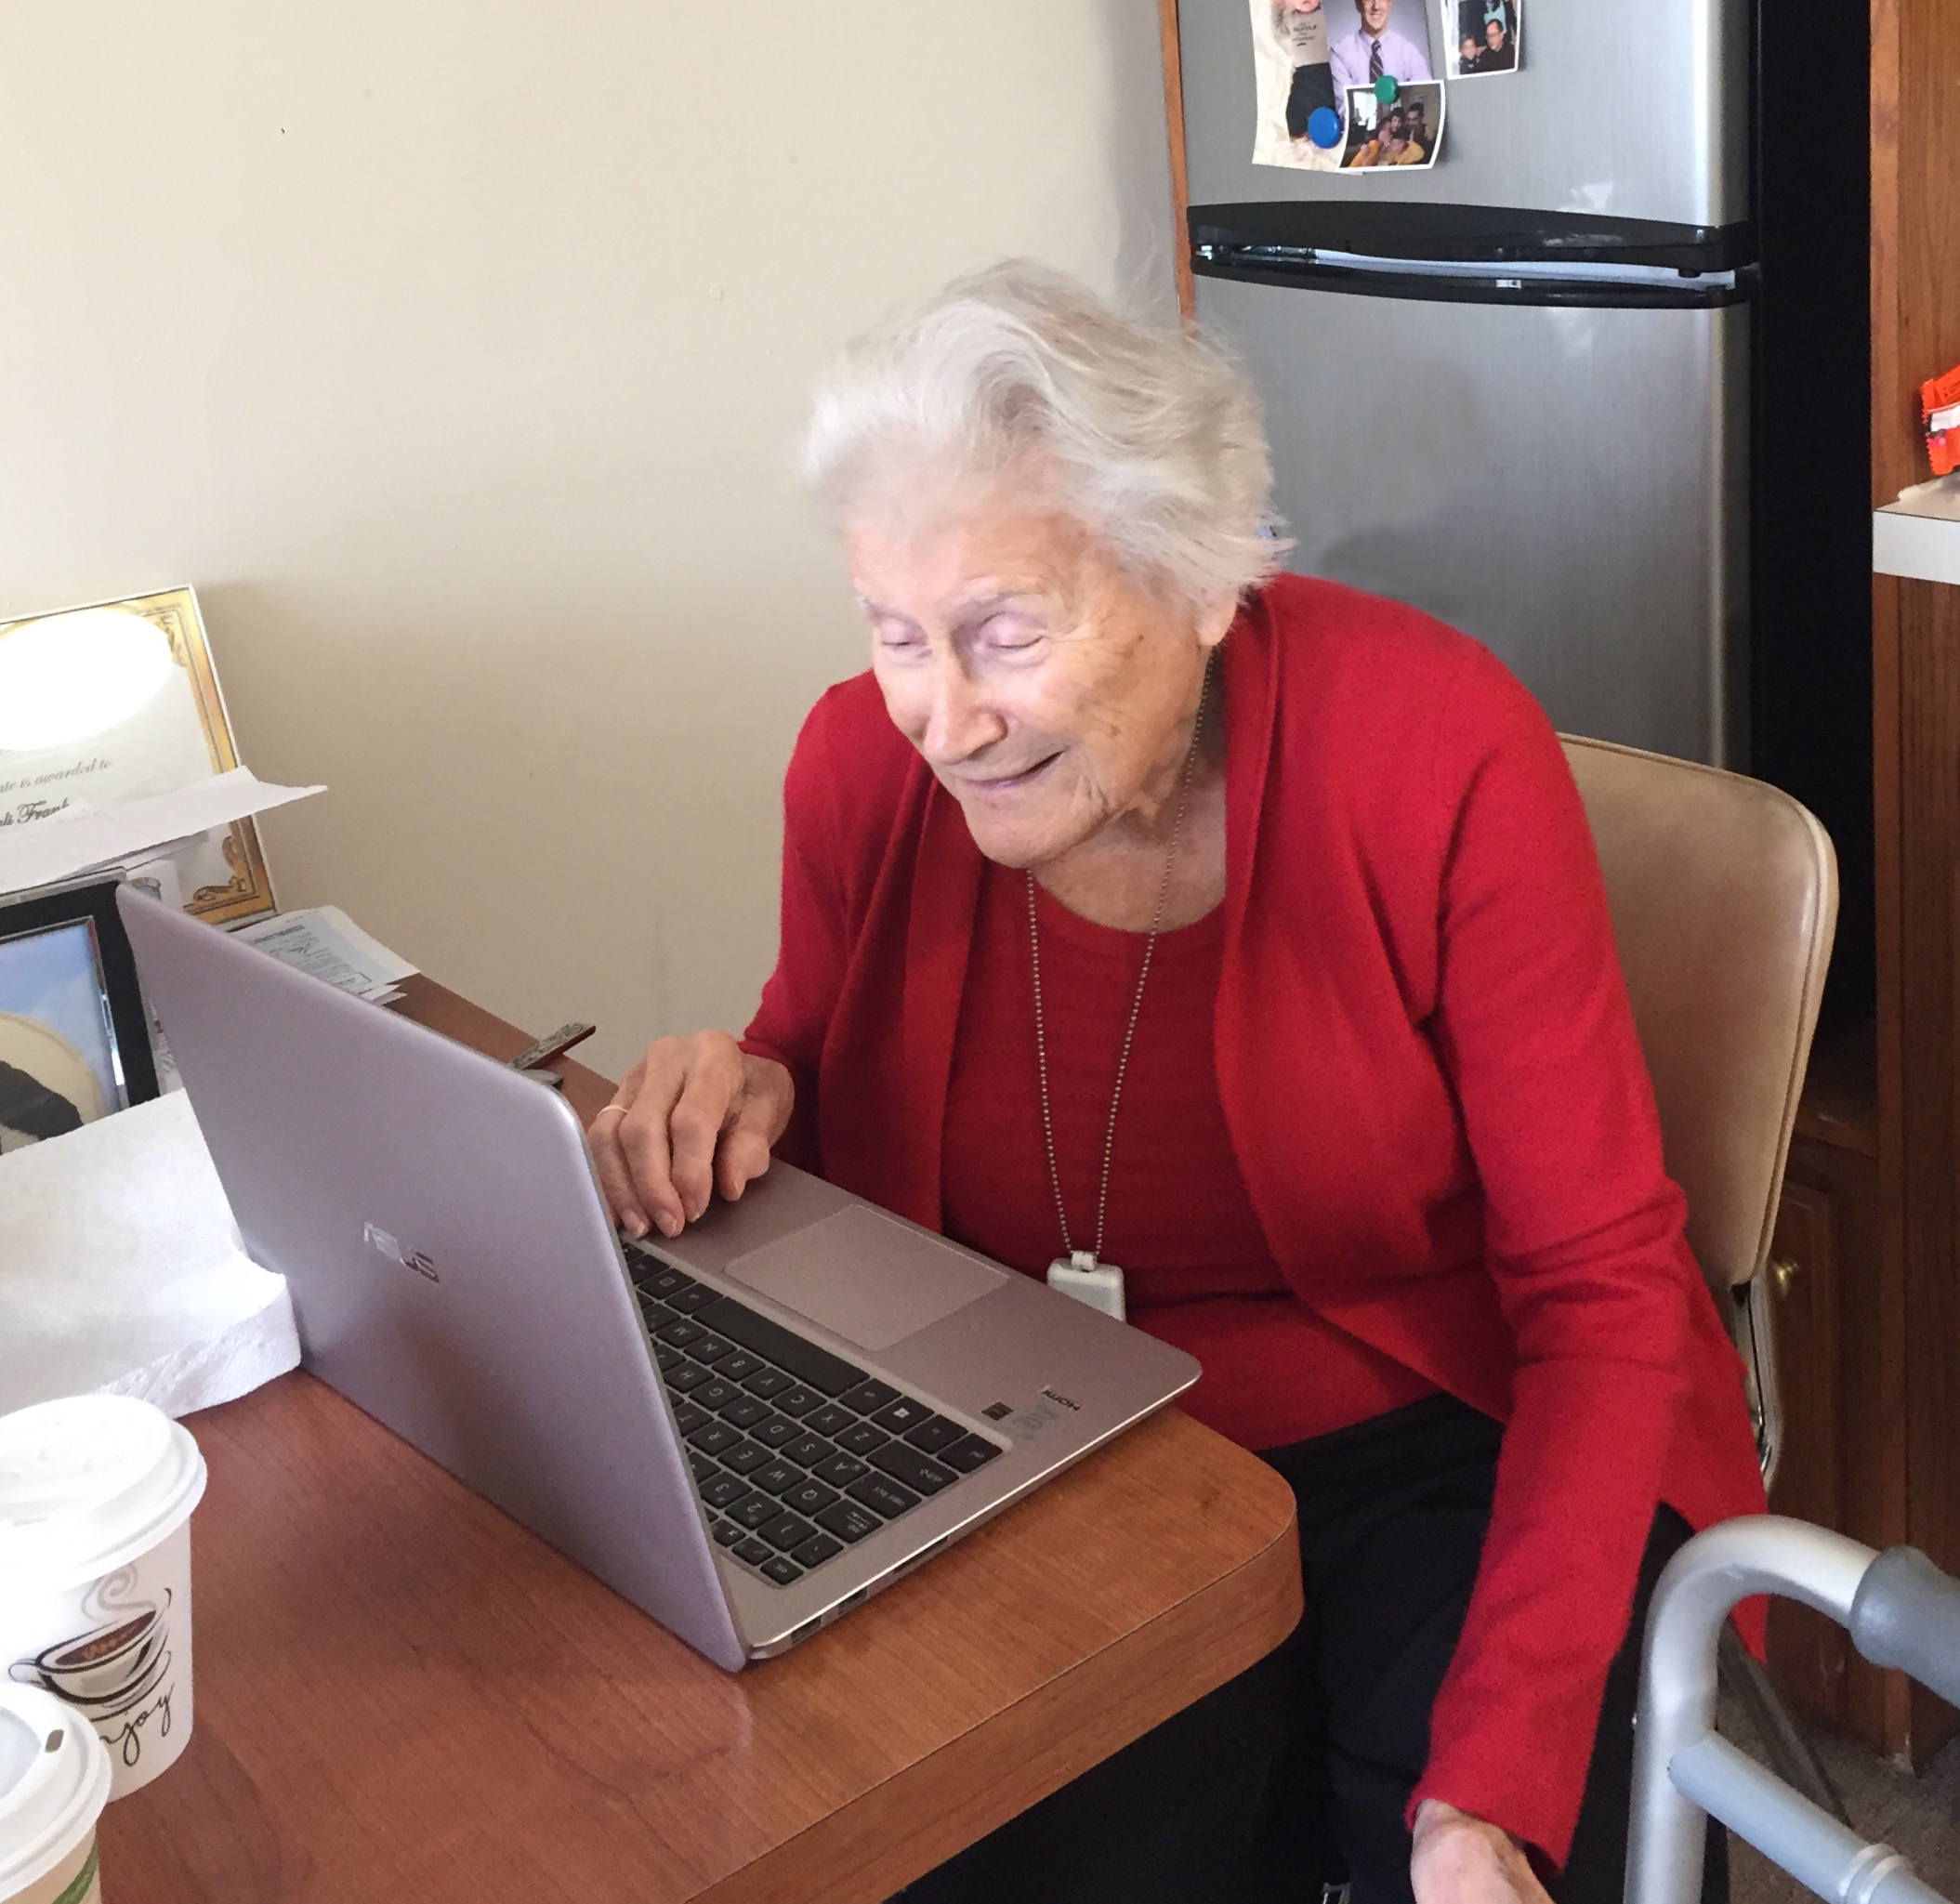 older woman smiling and looking at a laptop screen